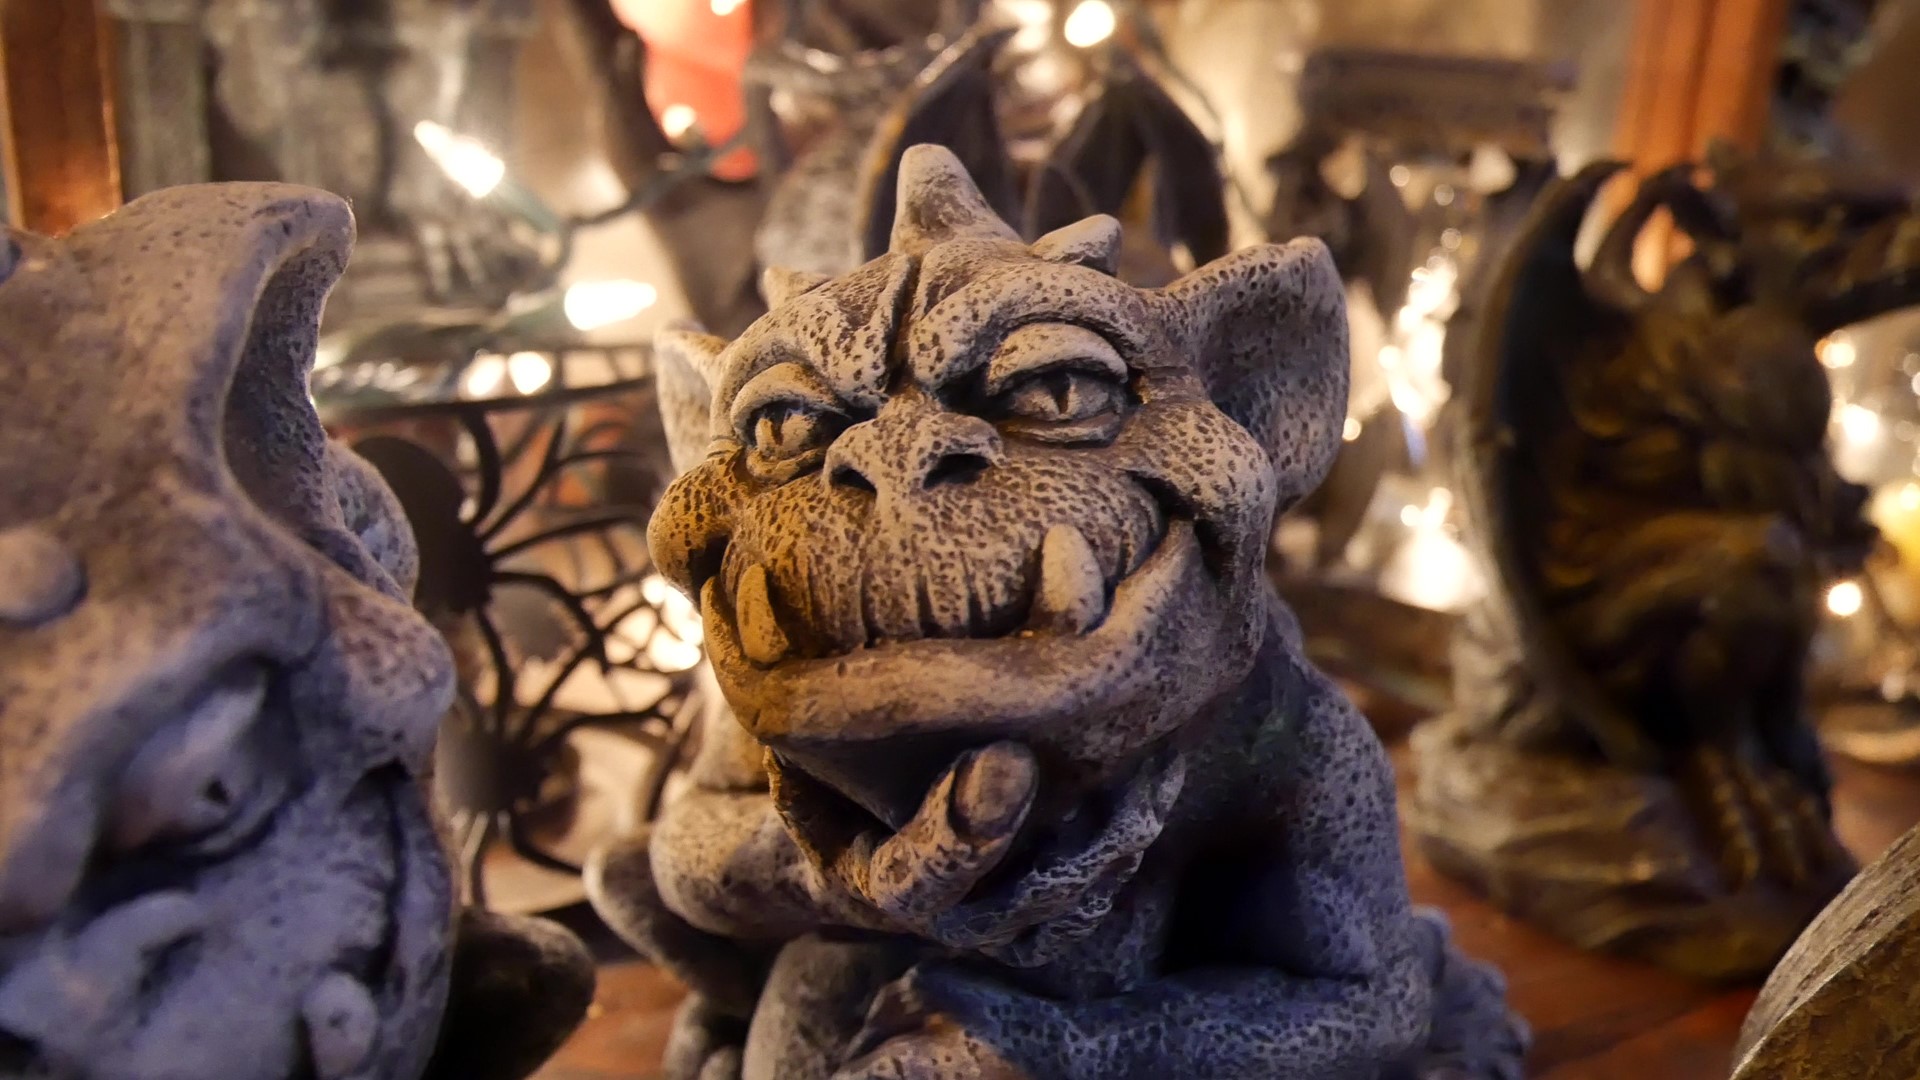 Gargoyles Statuary has been in business since 1992, selling all things magical and creative. #k5evening